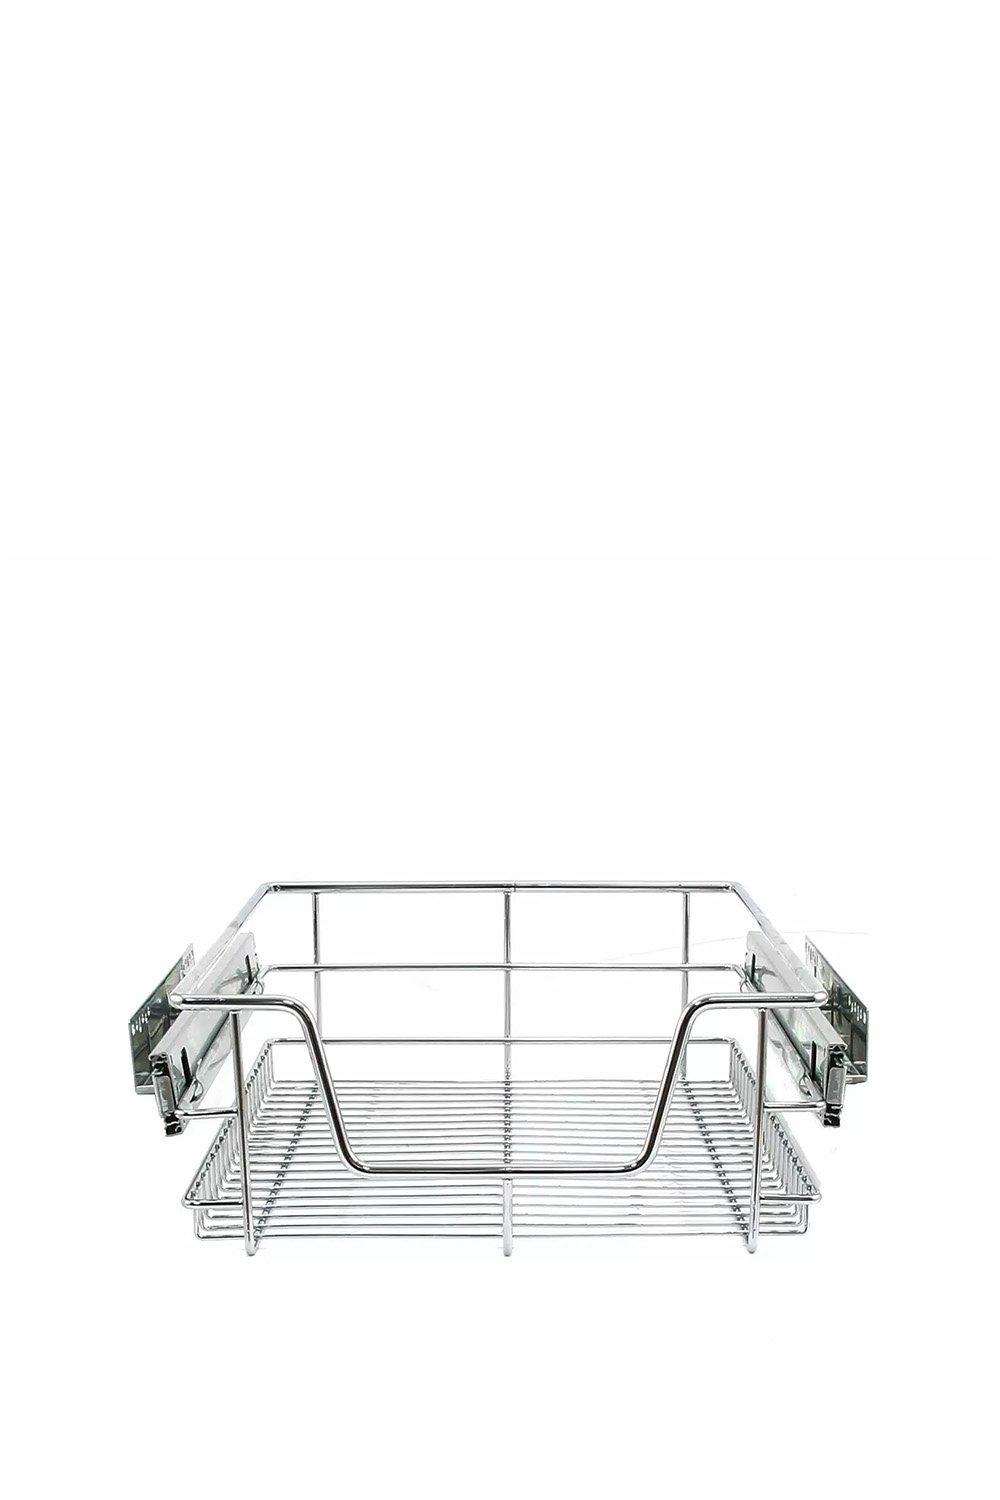 2 x KuKoo Kitchen Pull Out Storage Baskets - 400mm Wide Cabinet